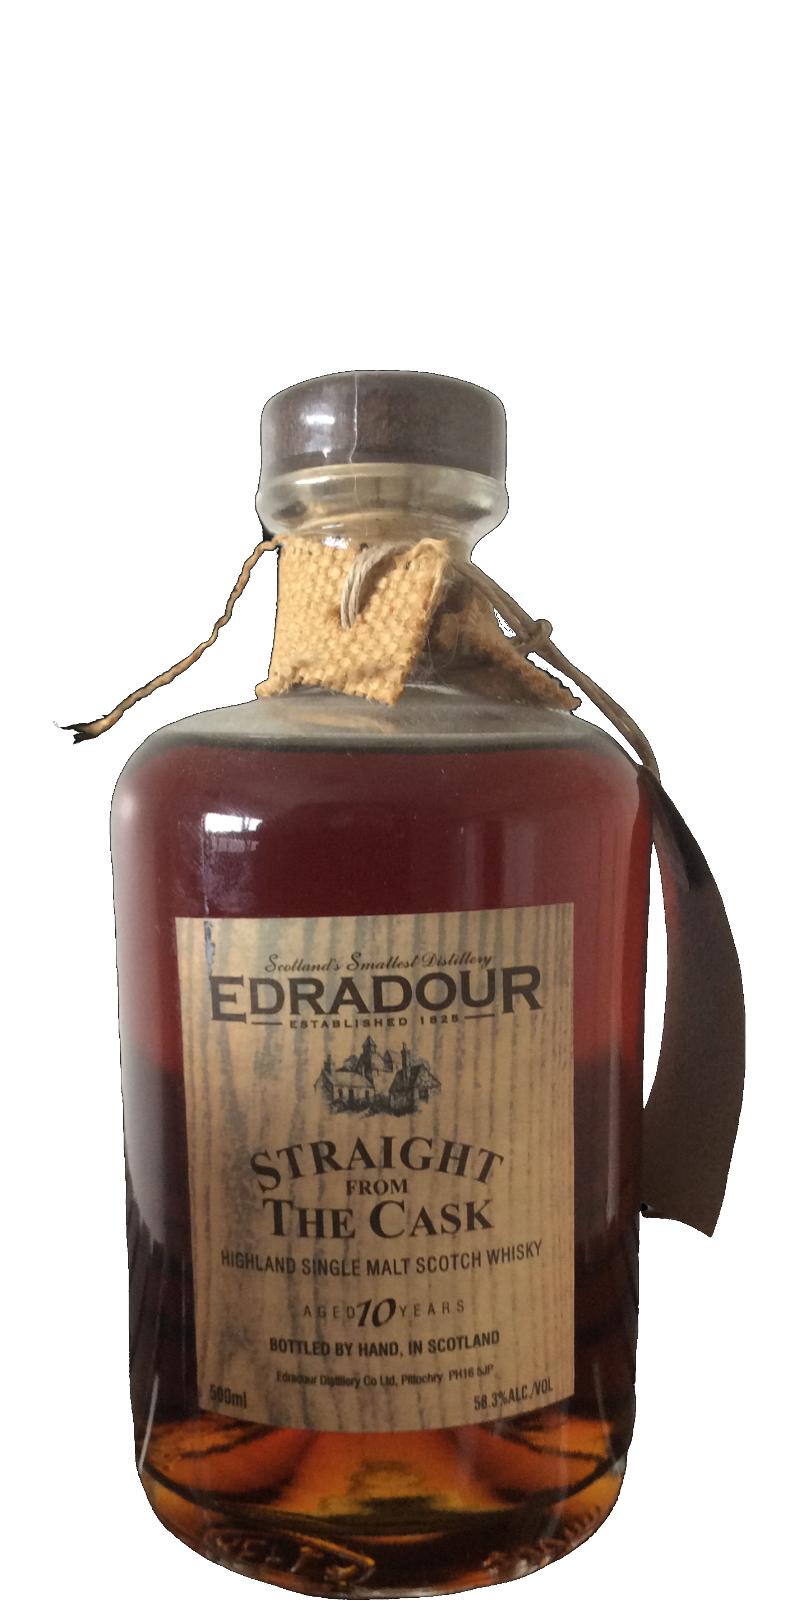 Edradour 1993 Straight From The Cask Sherry Cask Matured #341 58.3% 500ml